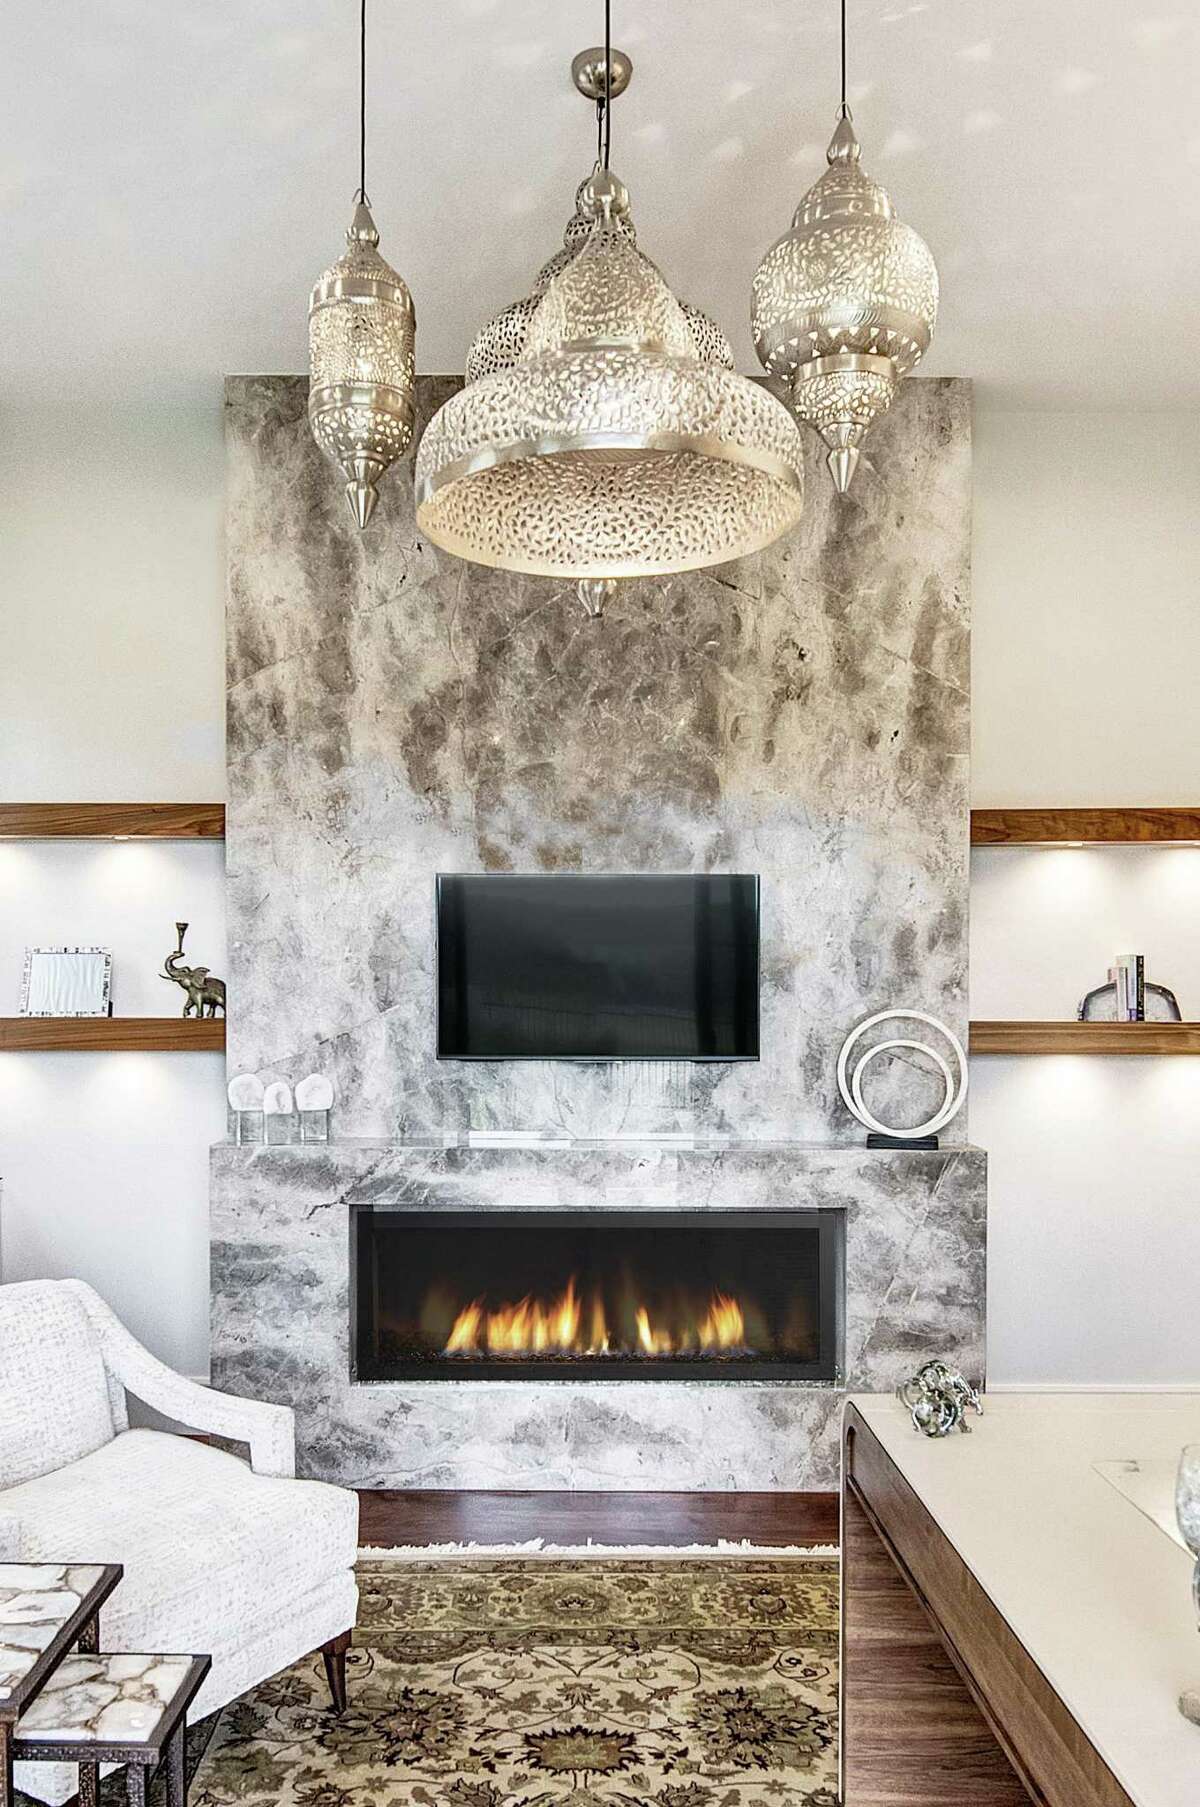 Fior de Bosco marble from Aria Stone Gallery was used around this fireplace.